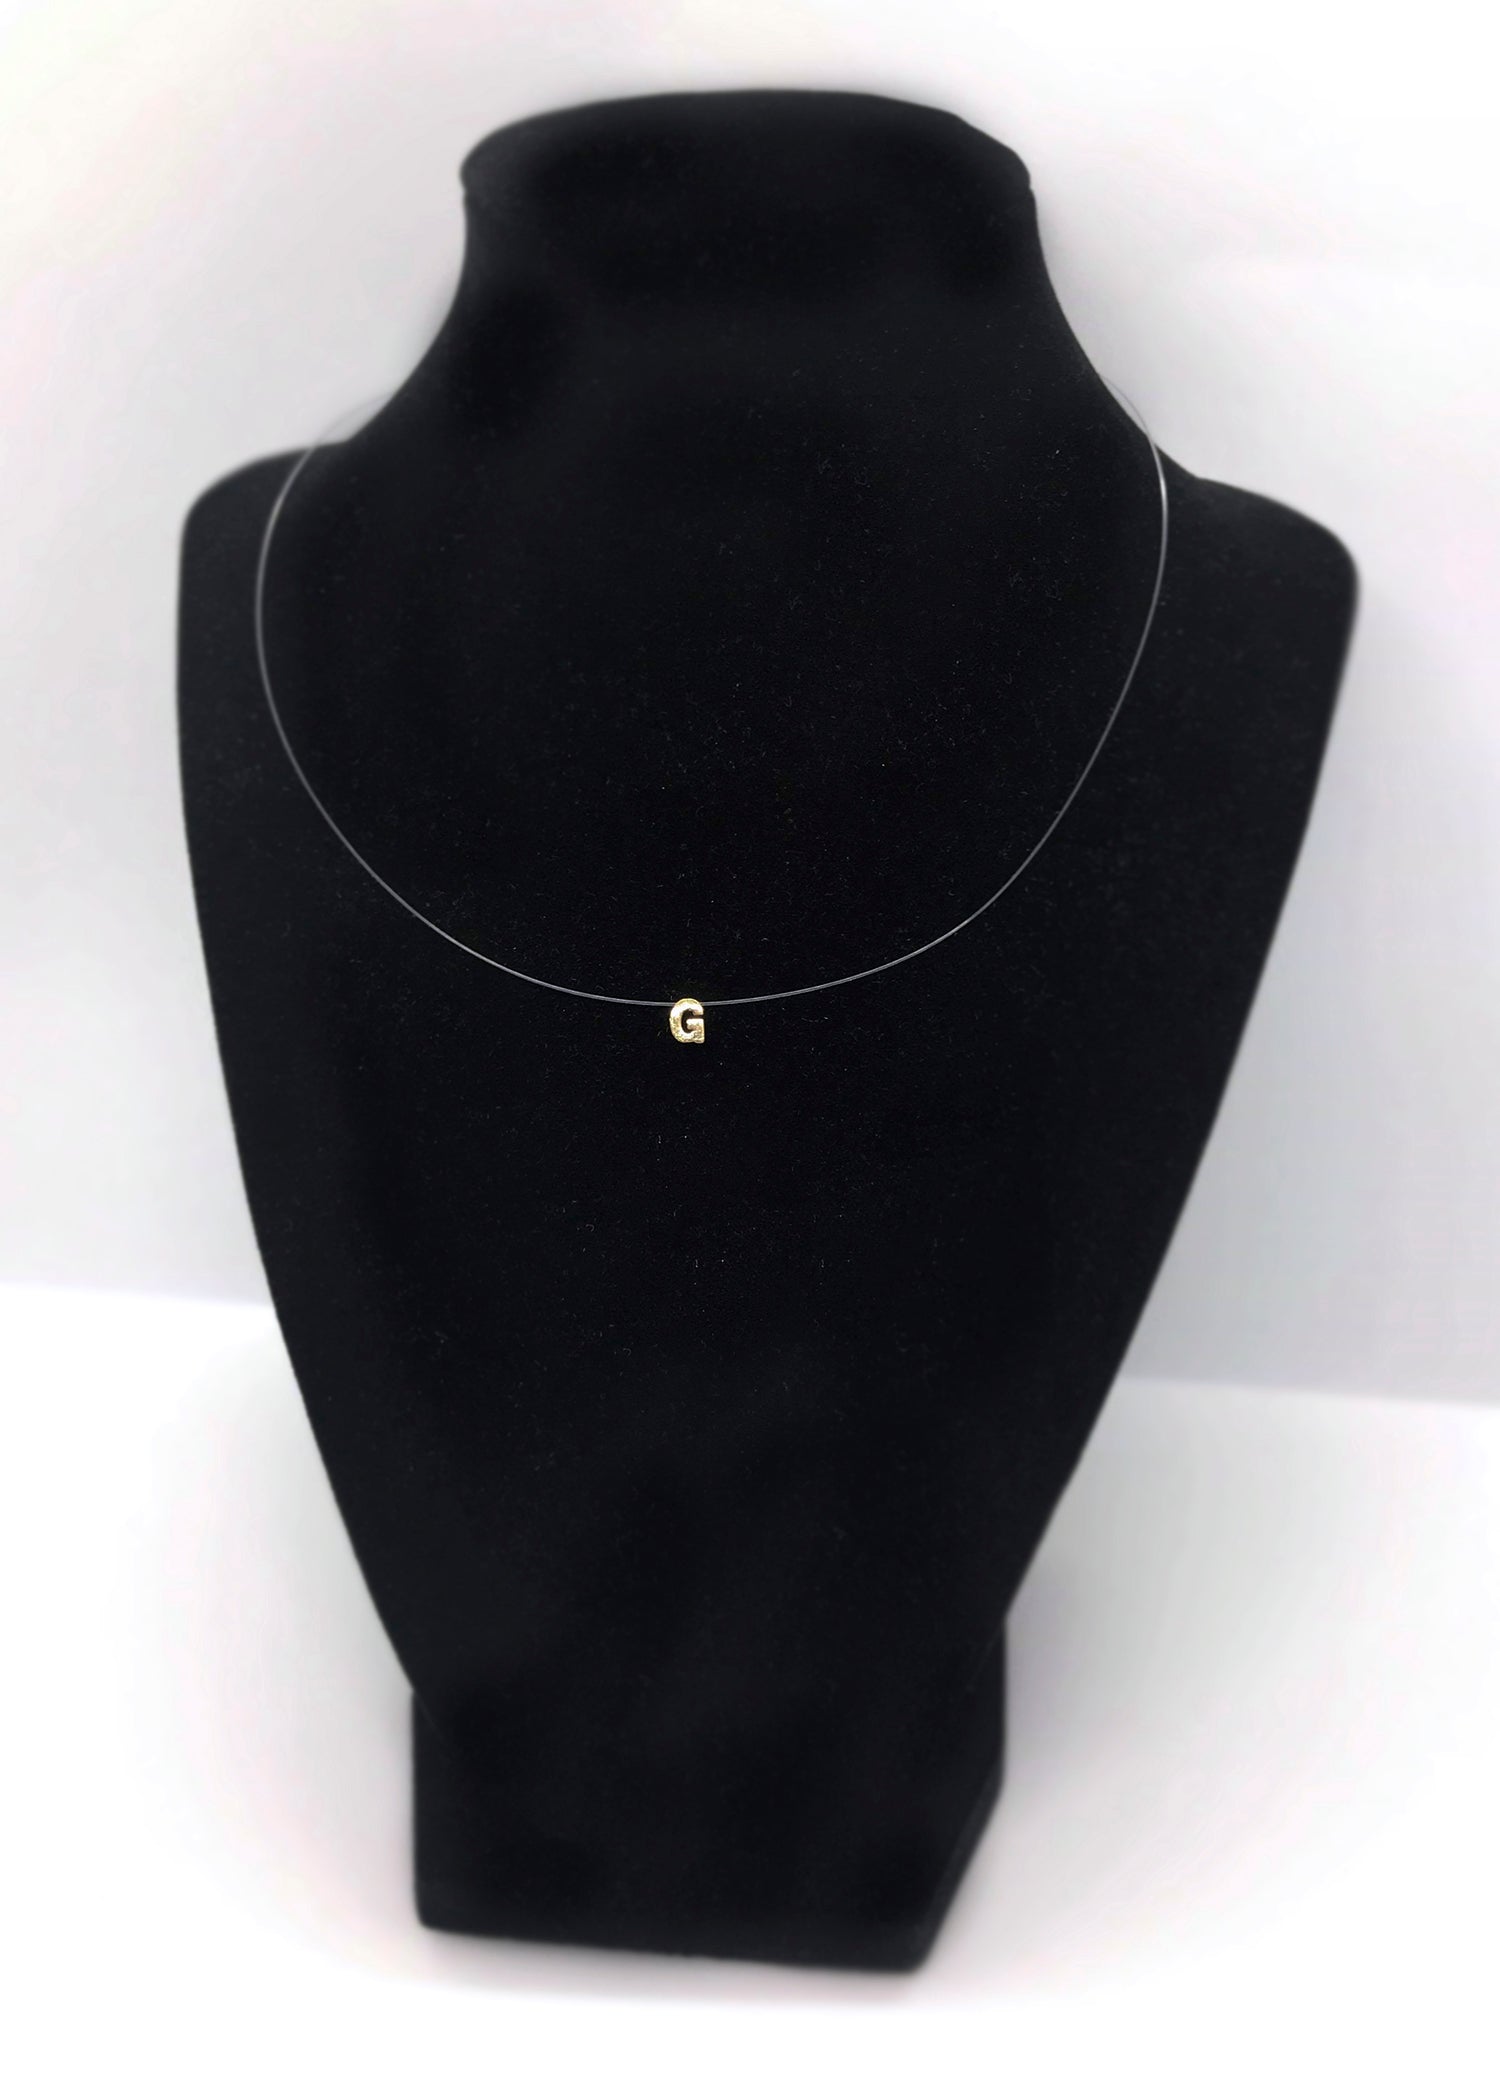 Invisible necklace with gold letter charm